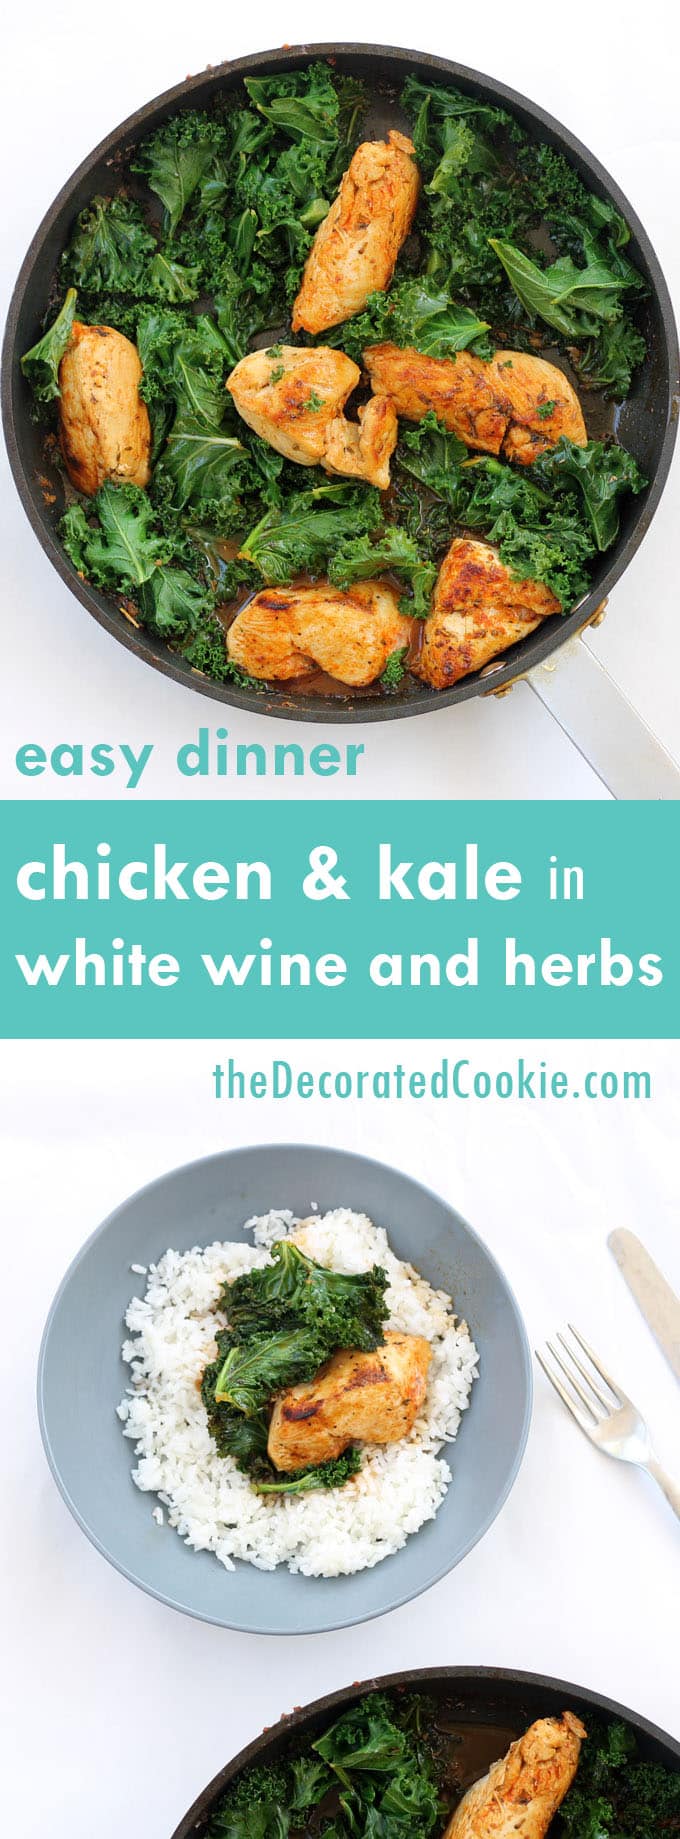 easy dinner: chicken and kale in white wine and herbs